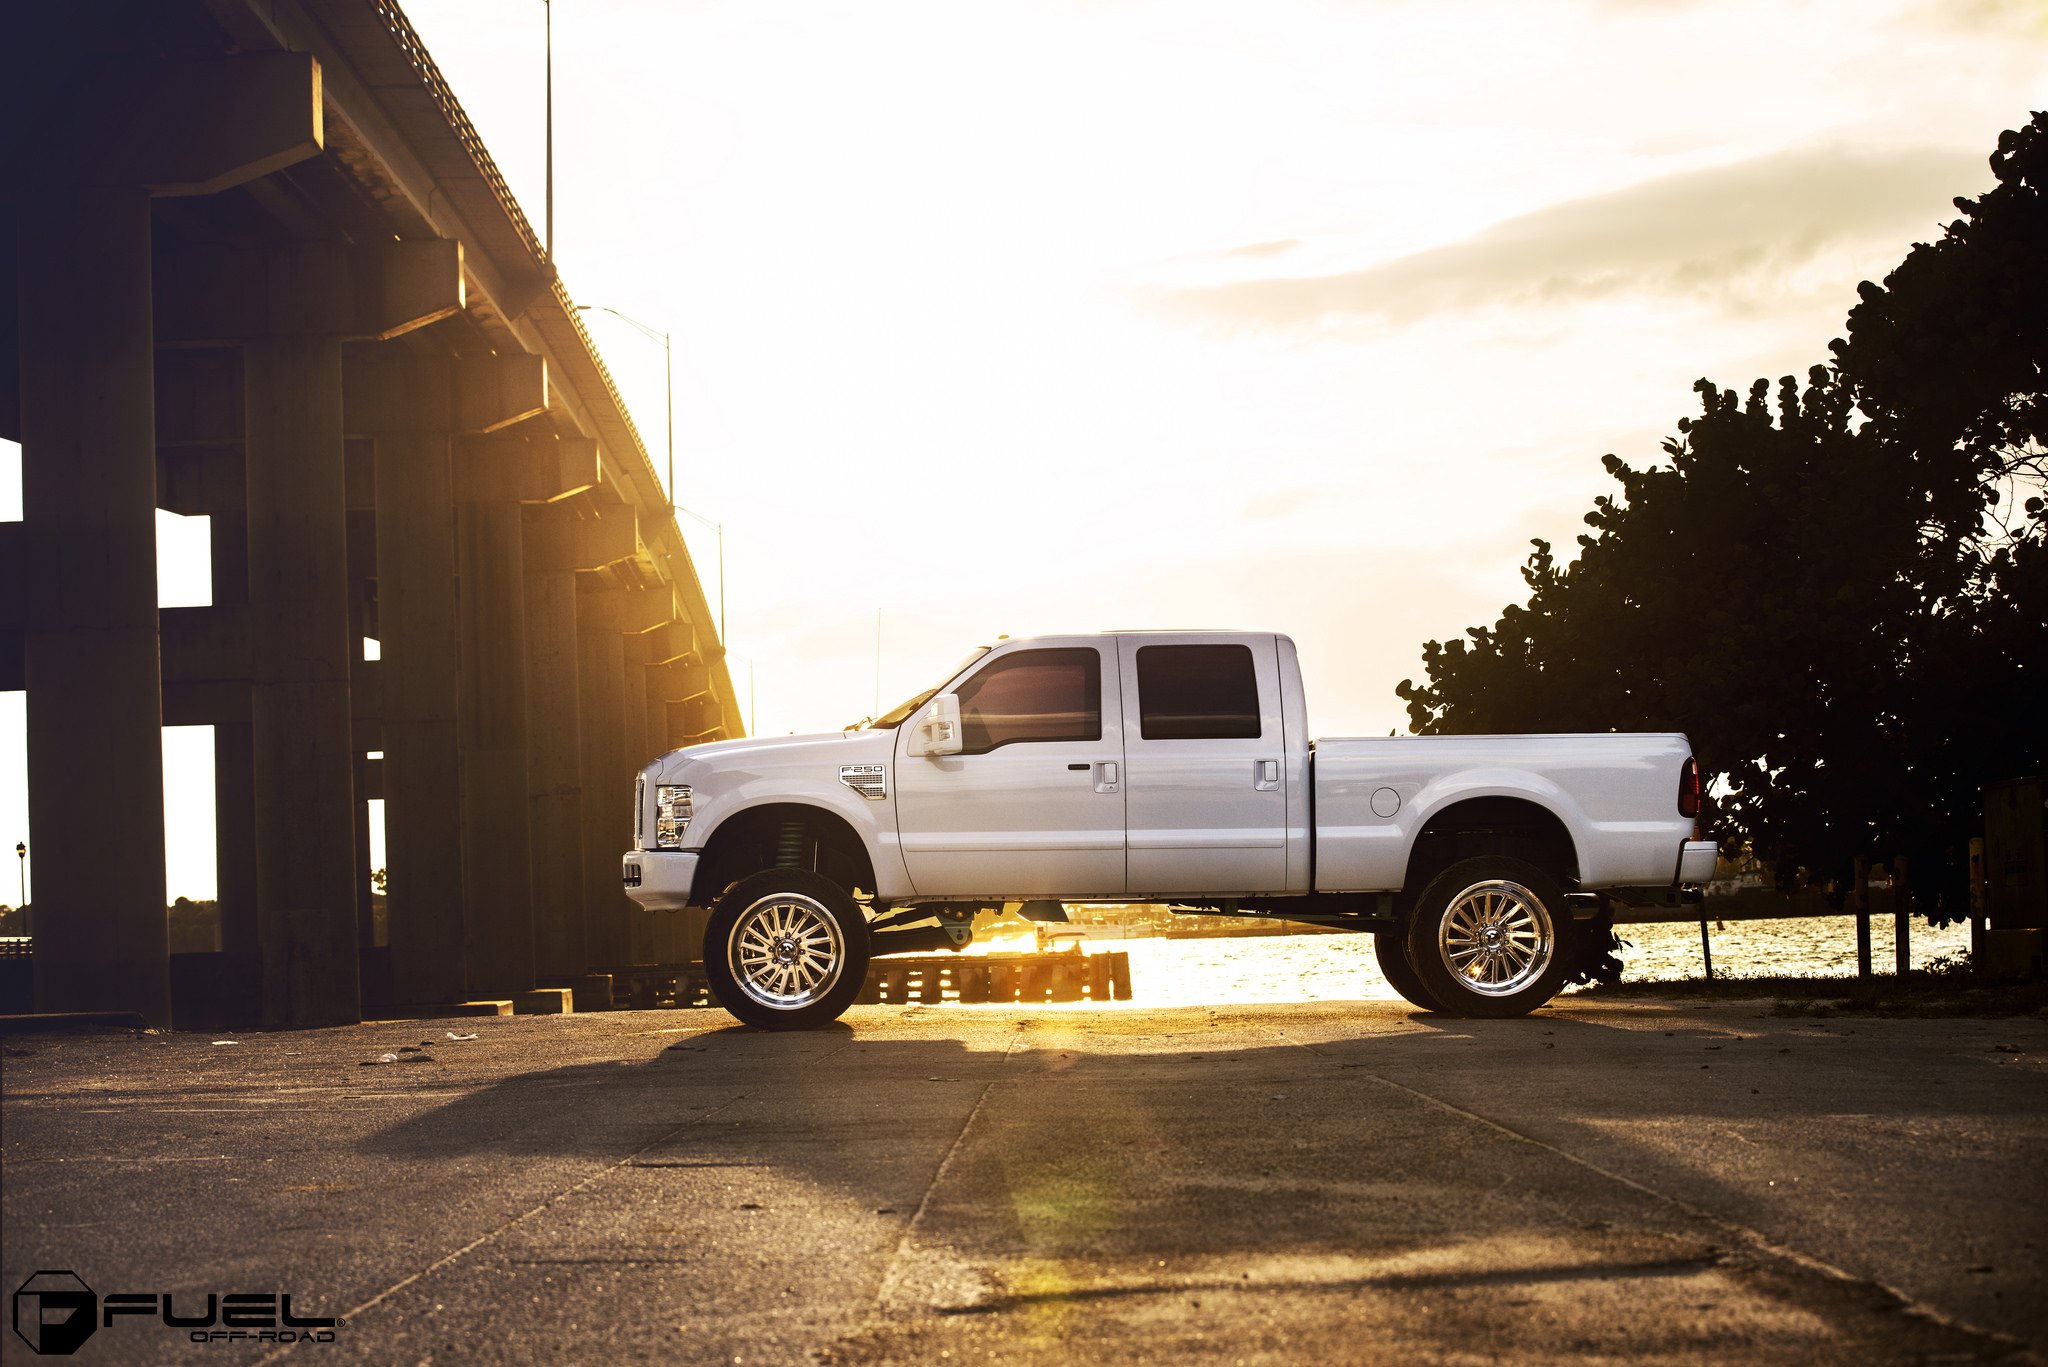 Super Duty F250 on a Beautiful Sunset Light - Photo by Fuel Off-Road